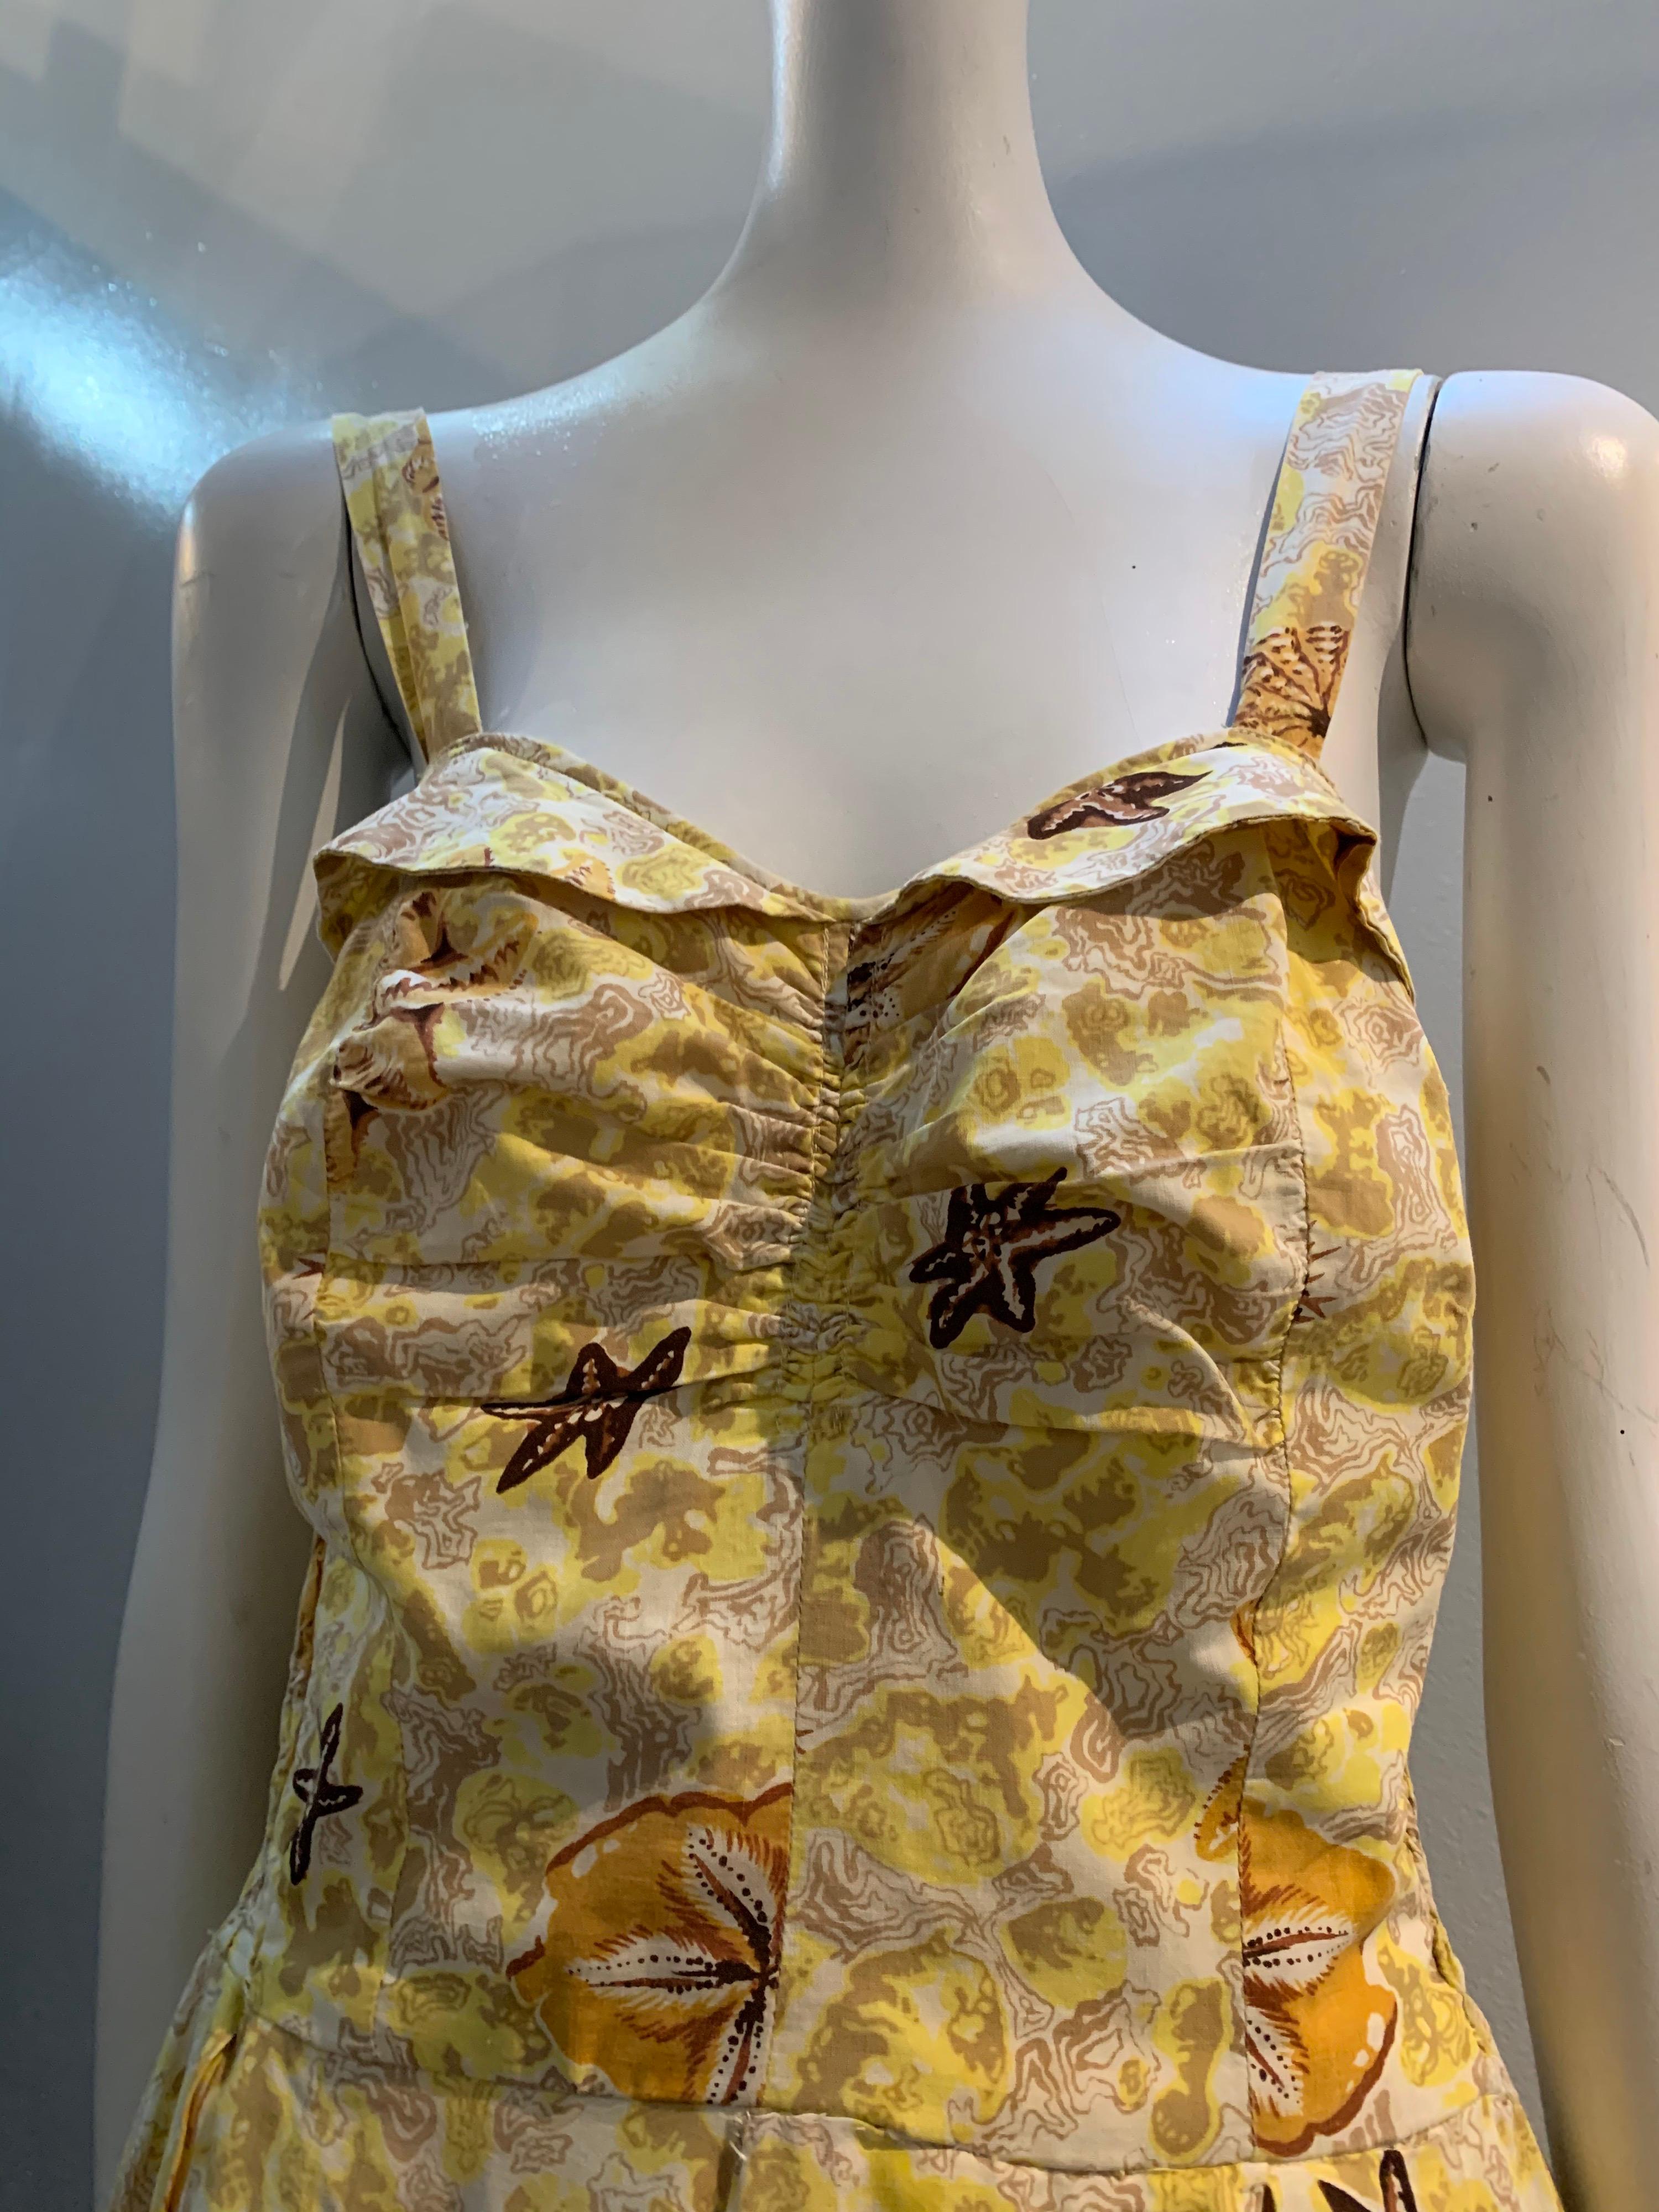 A sweet 1950s Pau Hana - Honolulu butter-yellow cotton sundress with stylized coral and sea shell print (including sea urchins, starfish and sand dollars). Ruched at center front and elasticized at side panels. Full skirt is deeply pleated. No